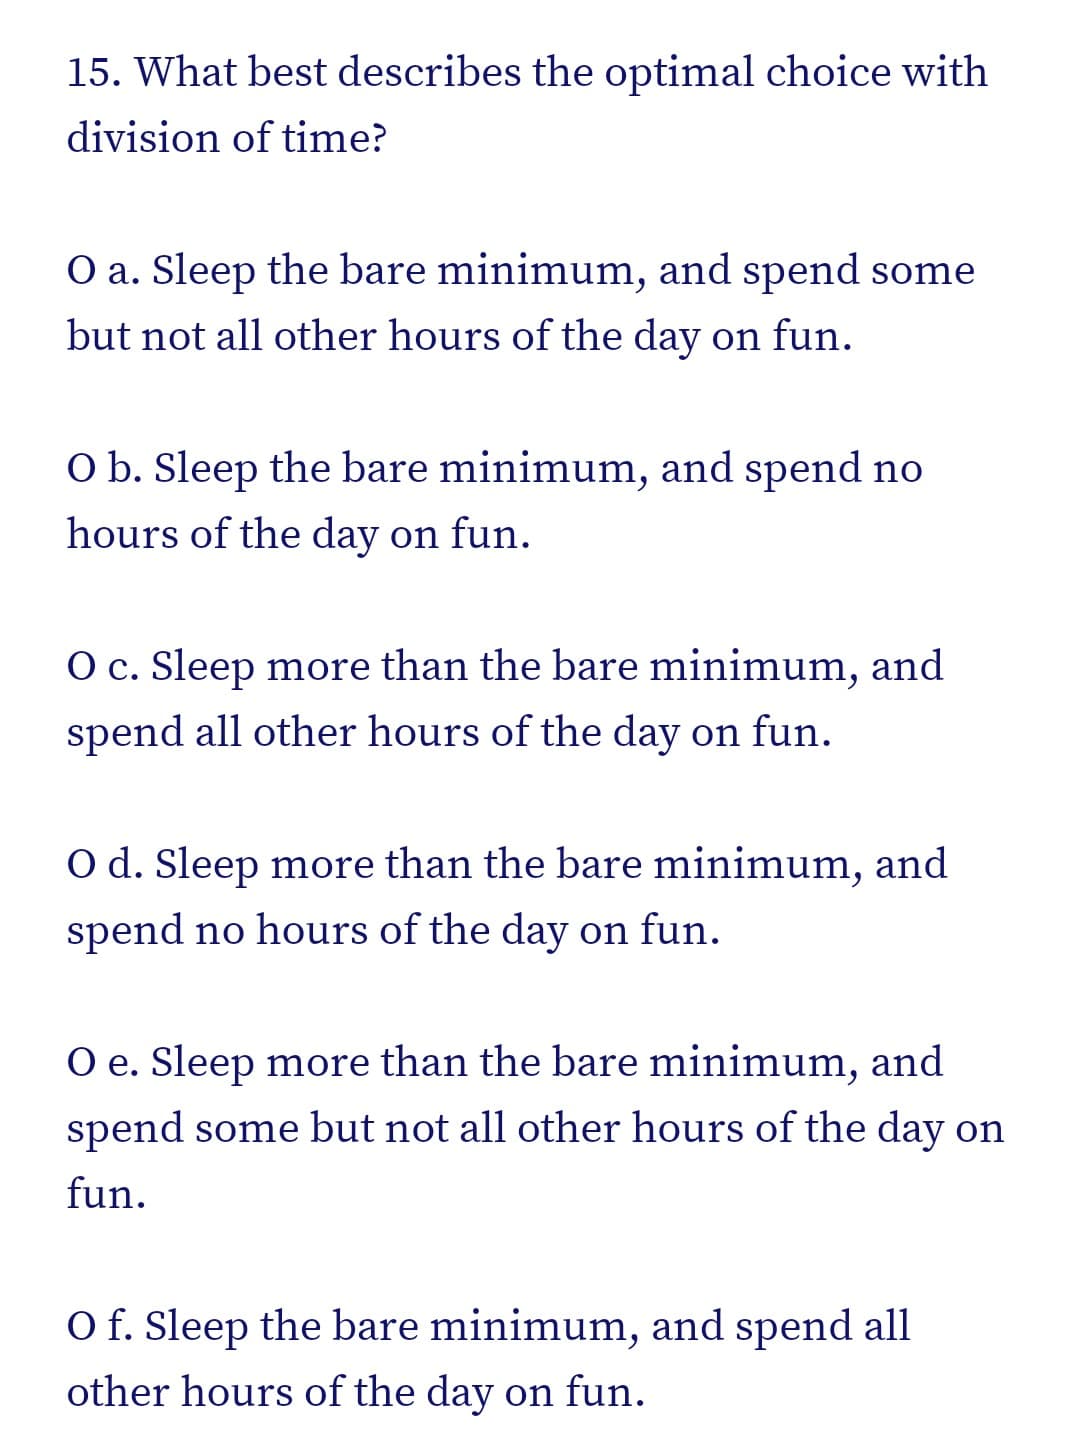 15. What best describes the optimal choice with
division of time?
O a. Sleep the bare minimum, and spend some
but not all other hours of the day on fun.
O b. Sleep the bare minimum, and spend no
hours of the day on fun.
O c. Sleep more than the bare minimum, and
spend all other hours of the day on fun.
O d. Sleep more than the bare minimum, and
spend no hours of the day on fun.
O e. Sleep more than the bare minimum, and
spend some but not all other hours of the day on
fun.
O f. Sleep the bare minimum, and spend all
other hours of the day on fun.
